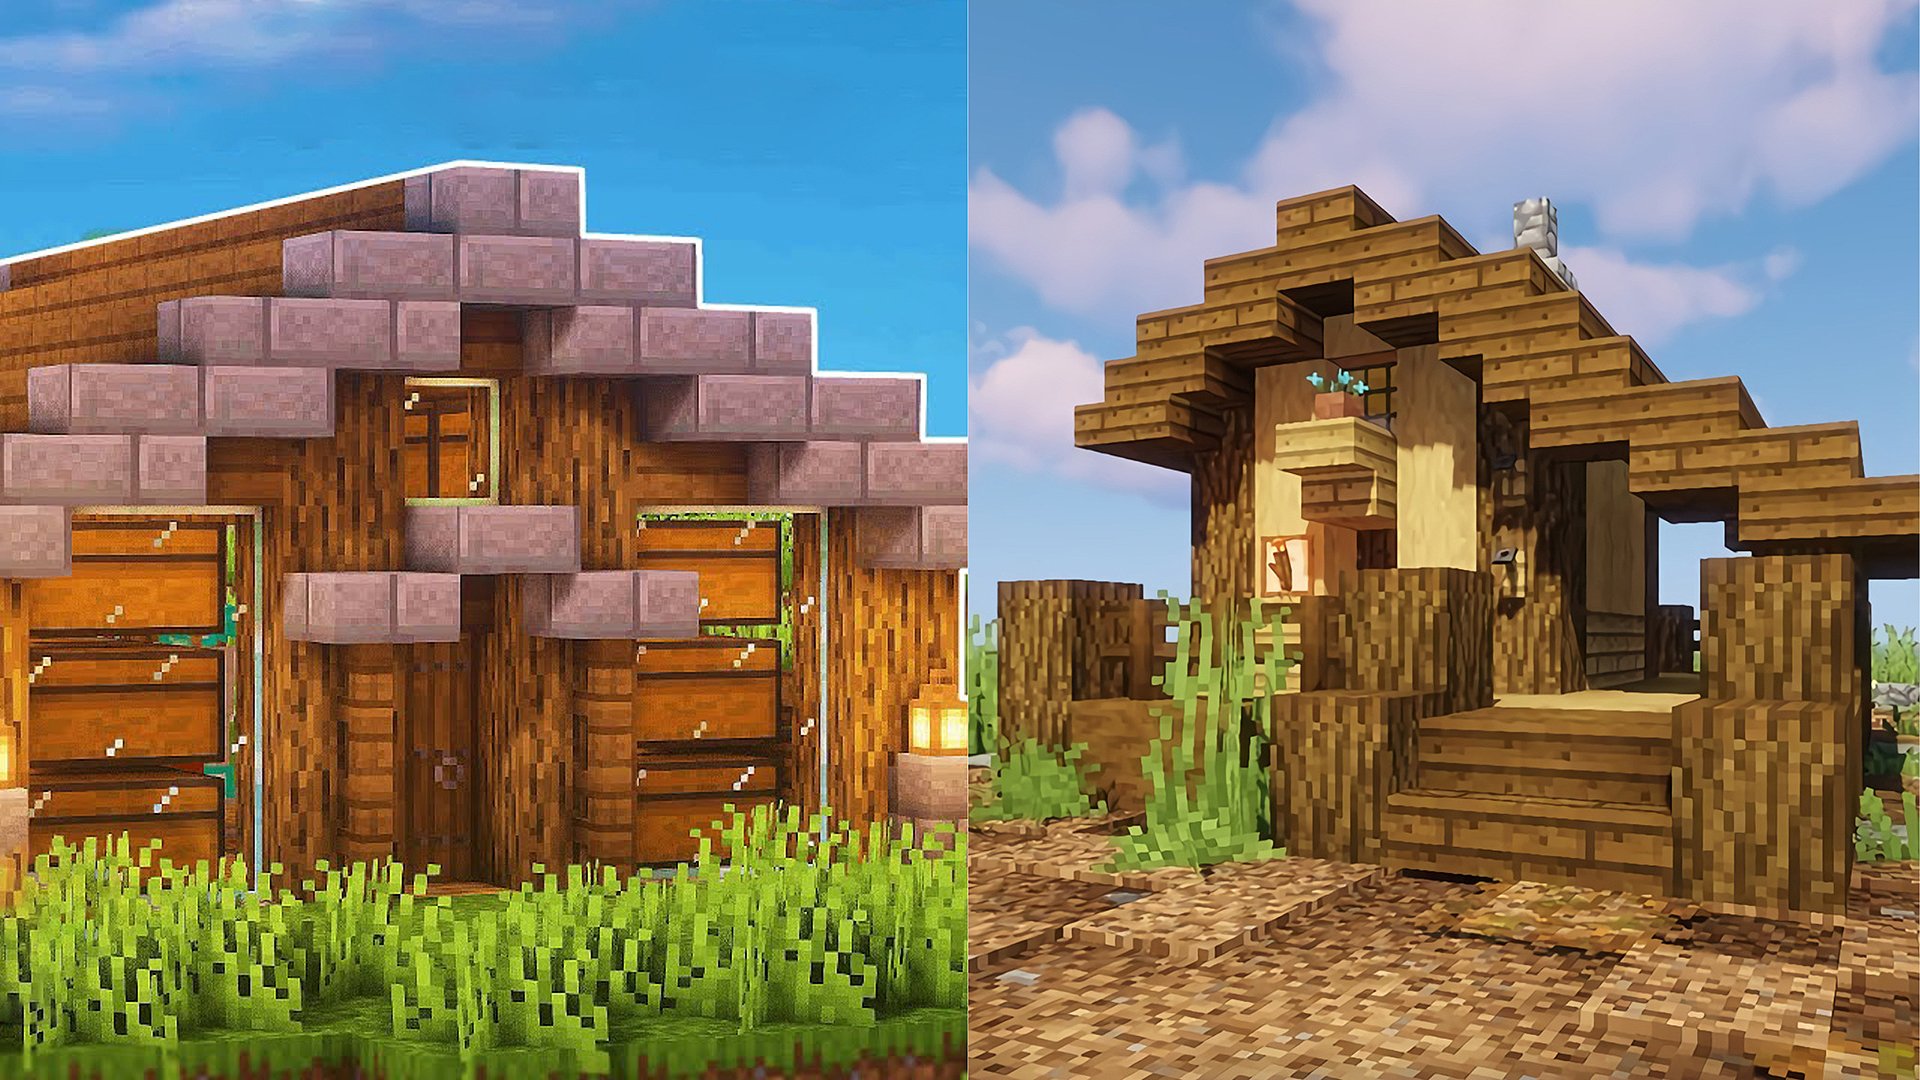 To expose trace semester The best small Minecraft houses in 2022